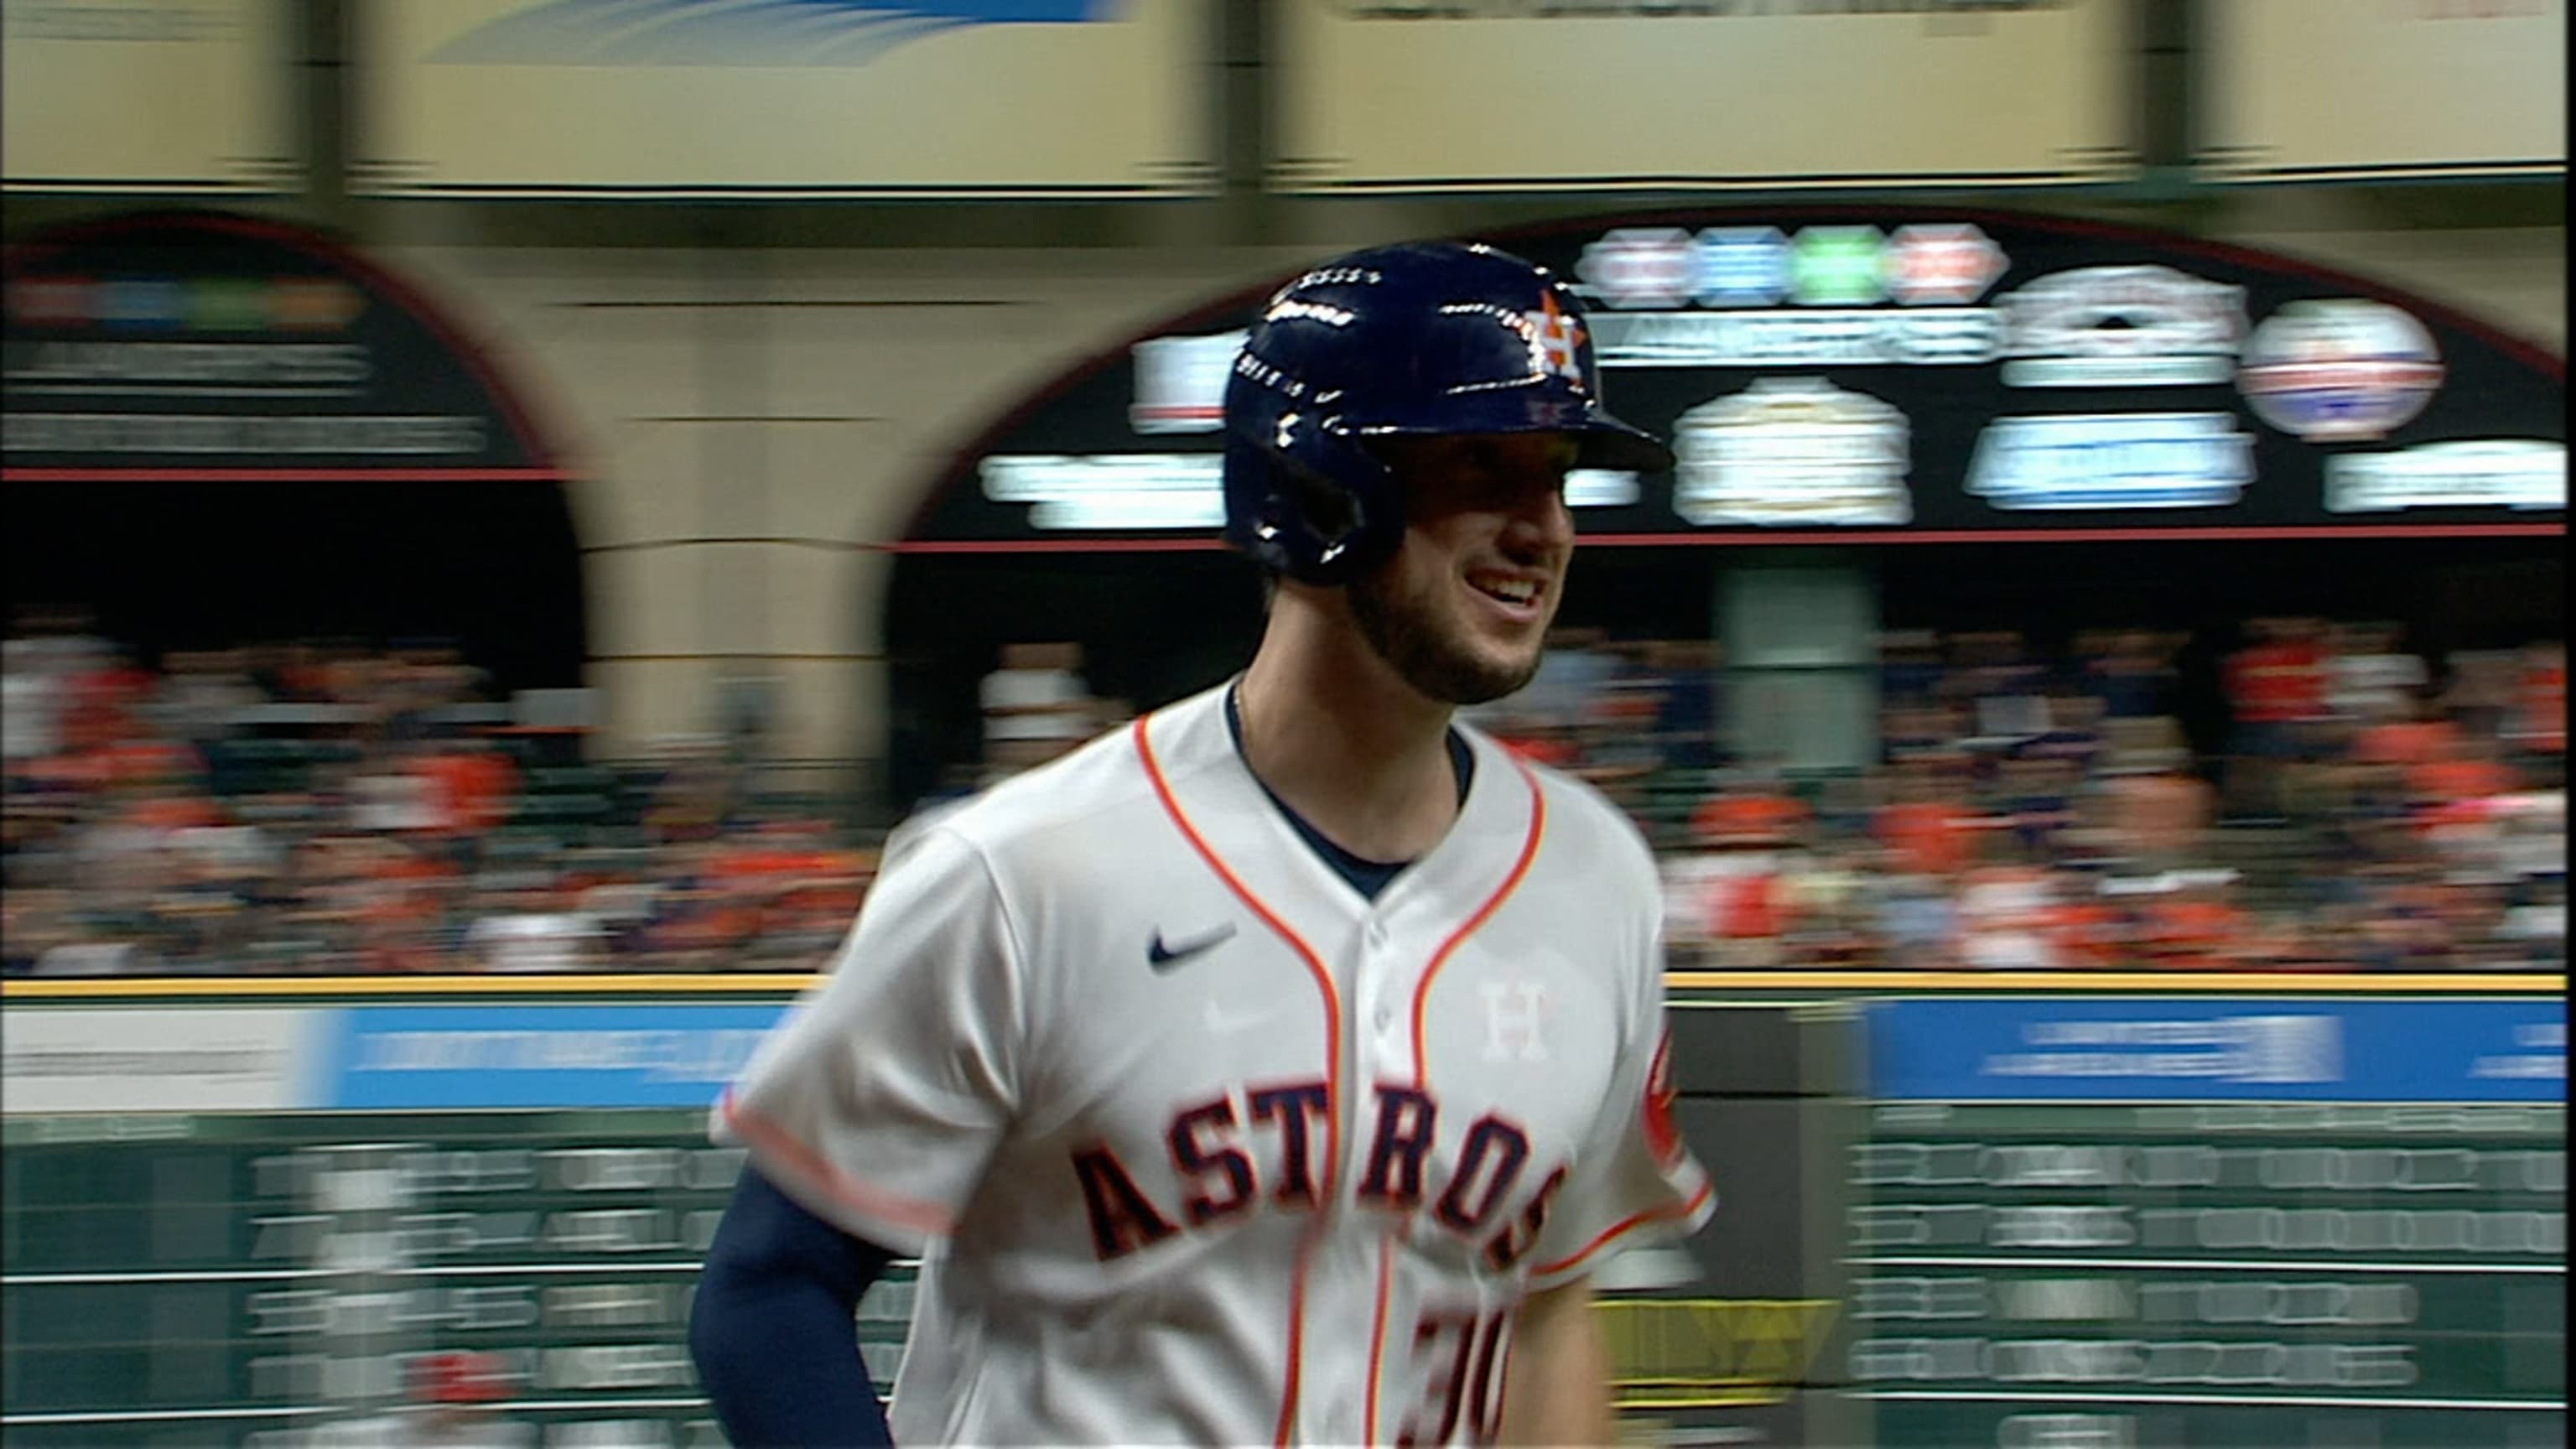 Astros hit 4 homers, with a pair by Abreu, to rout Twins 9-1 and